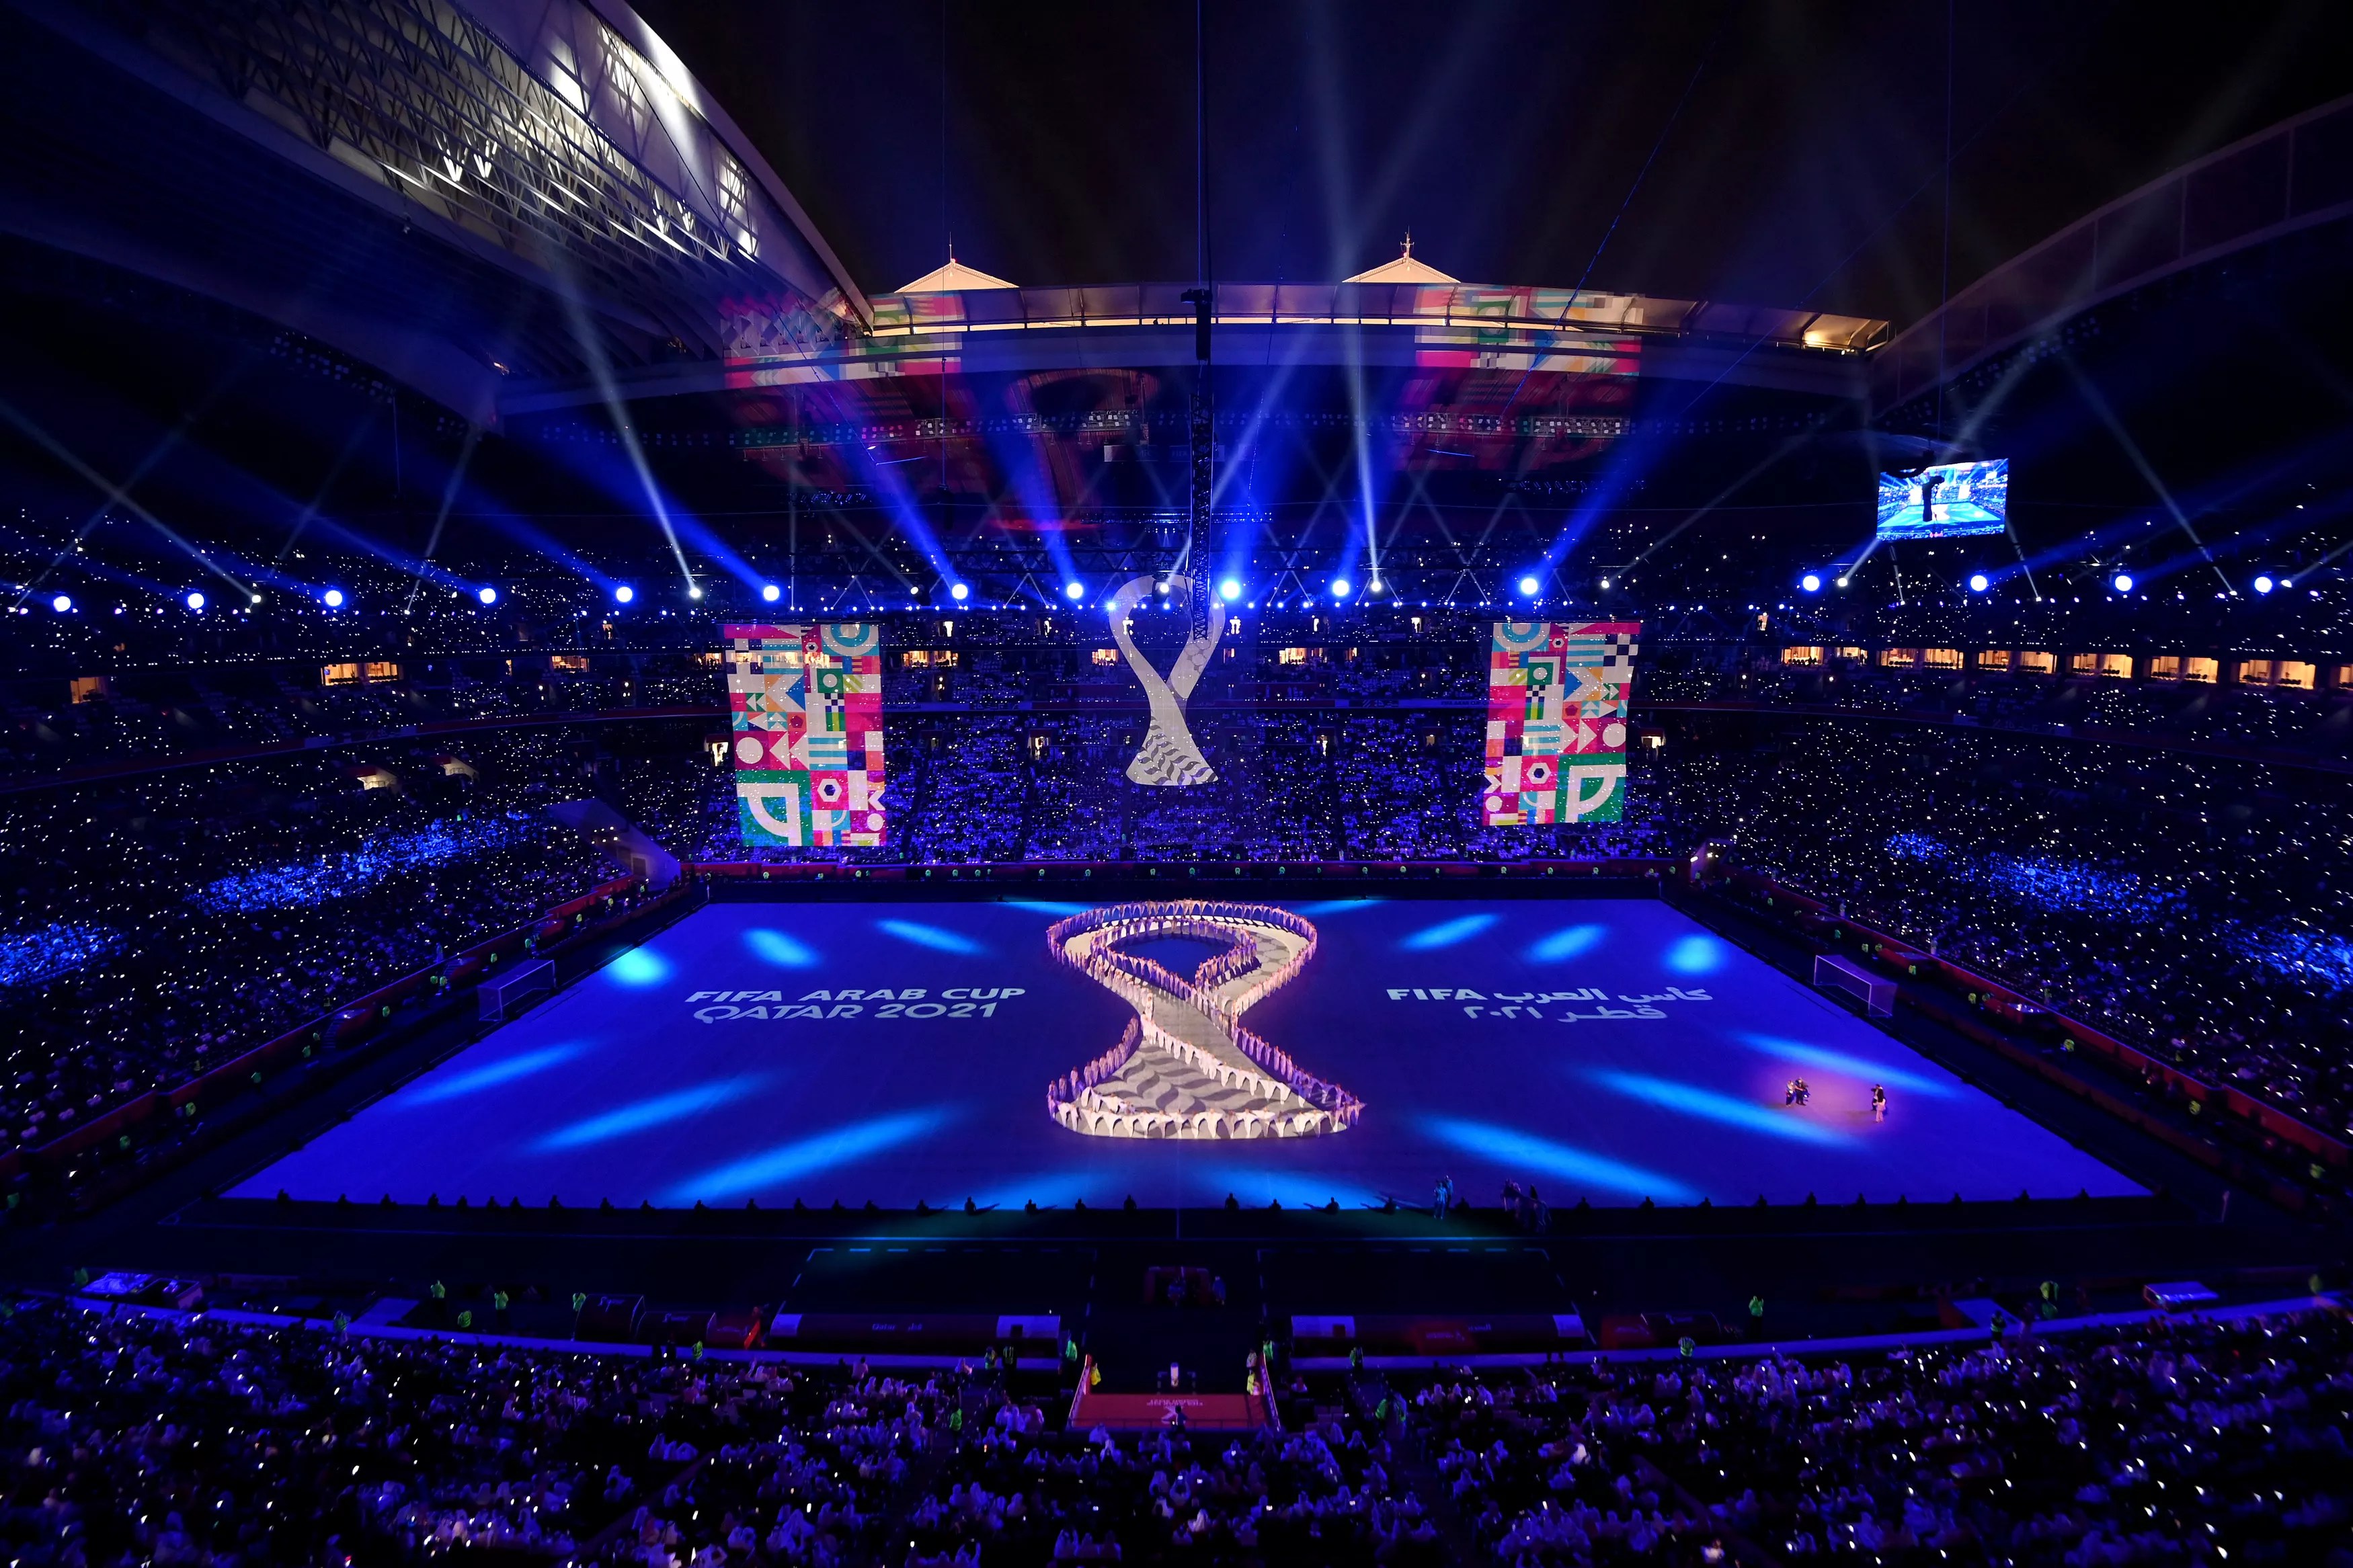 FIFA WC Opening Ceremony: Indian Vice President Jagdeep Dhankhar to attend opening ceremony of QATAR 2022, will meet FIFA officials - CHECK Details